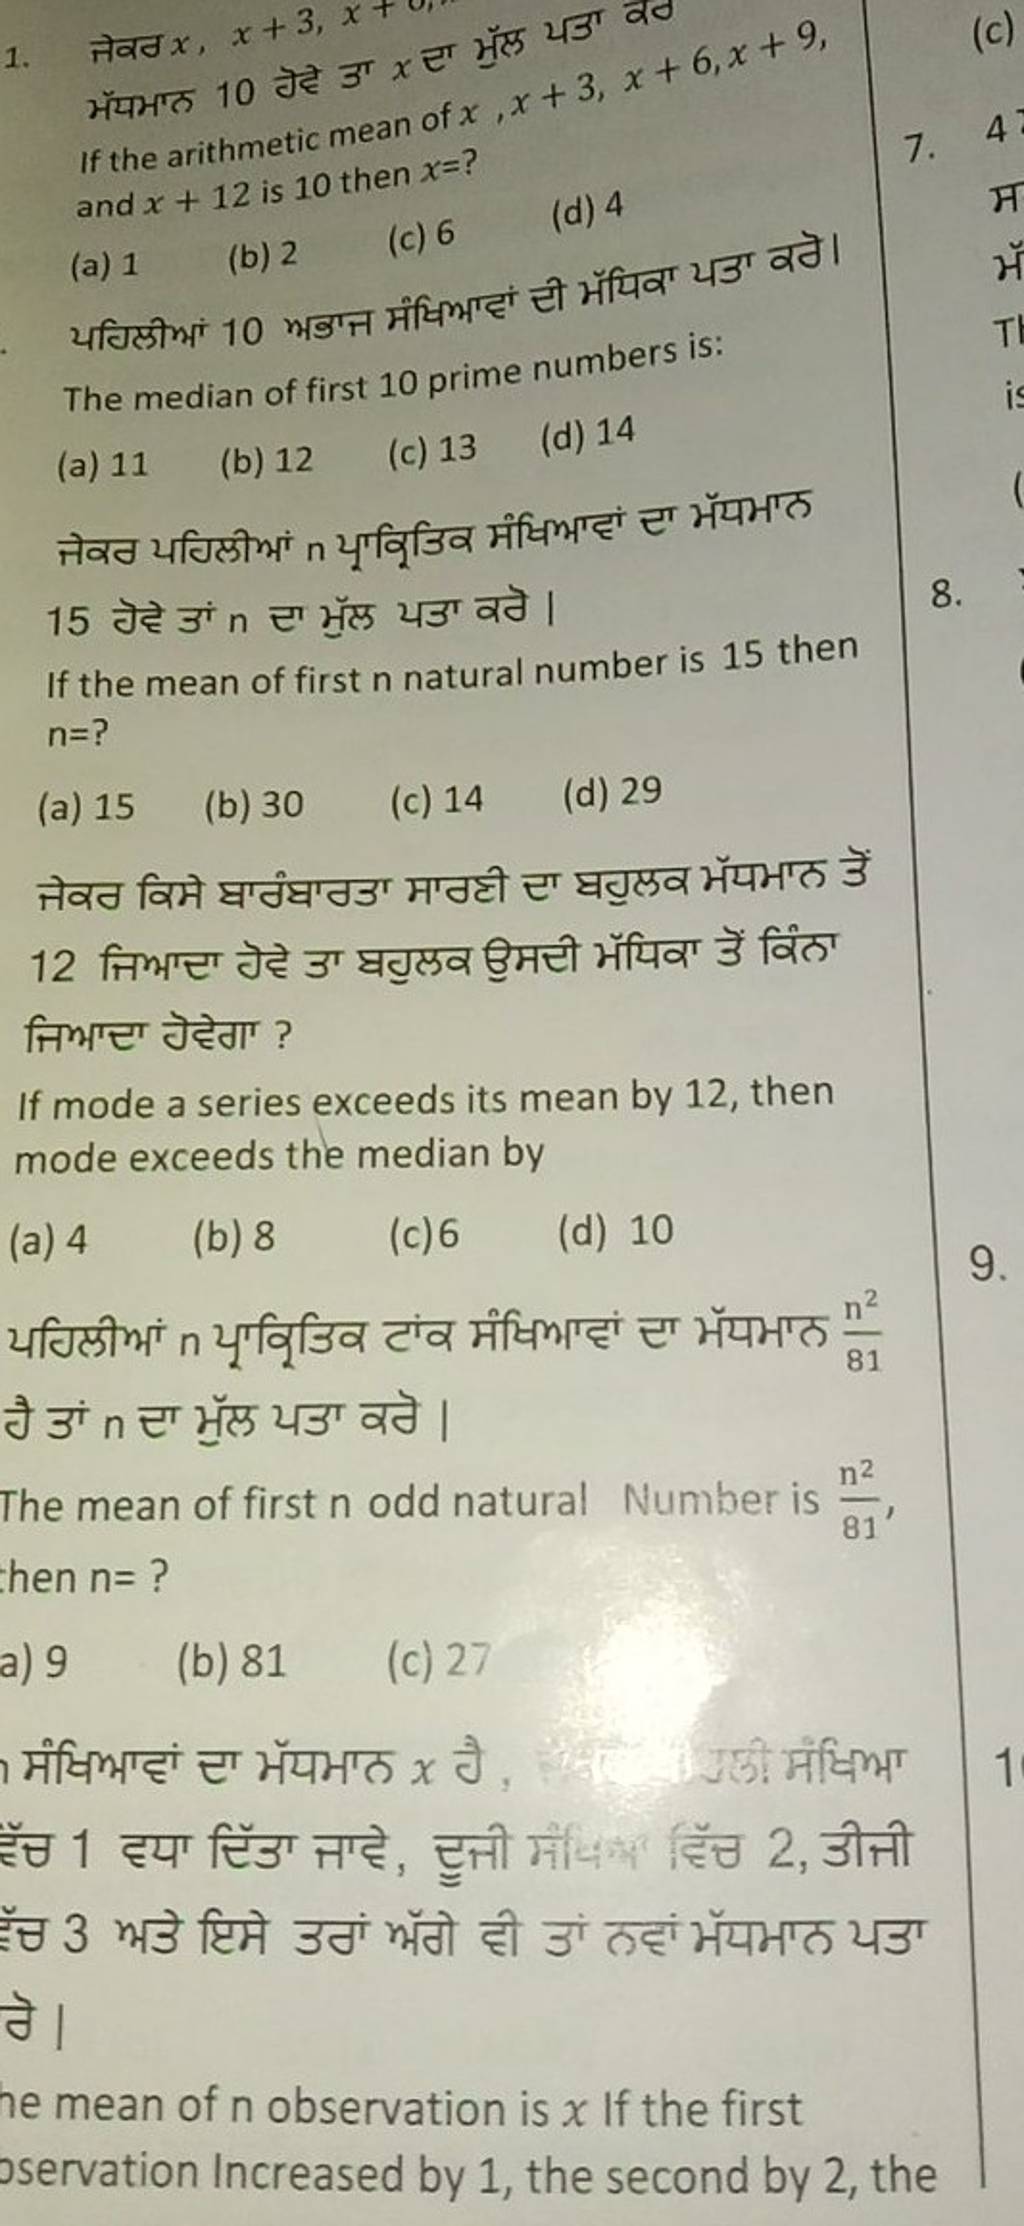 1. नेवठ x,x+3,x+3 मूल यड 20 If the arithmetic mean of x
(a) 1
(b) 2
(c